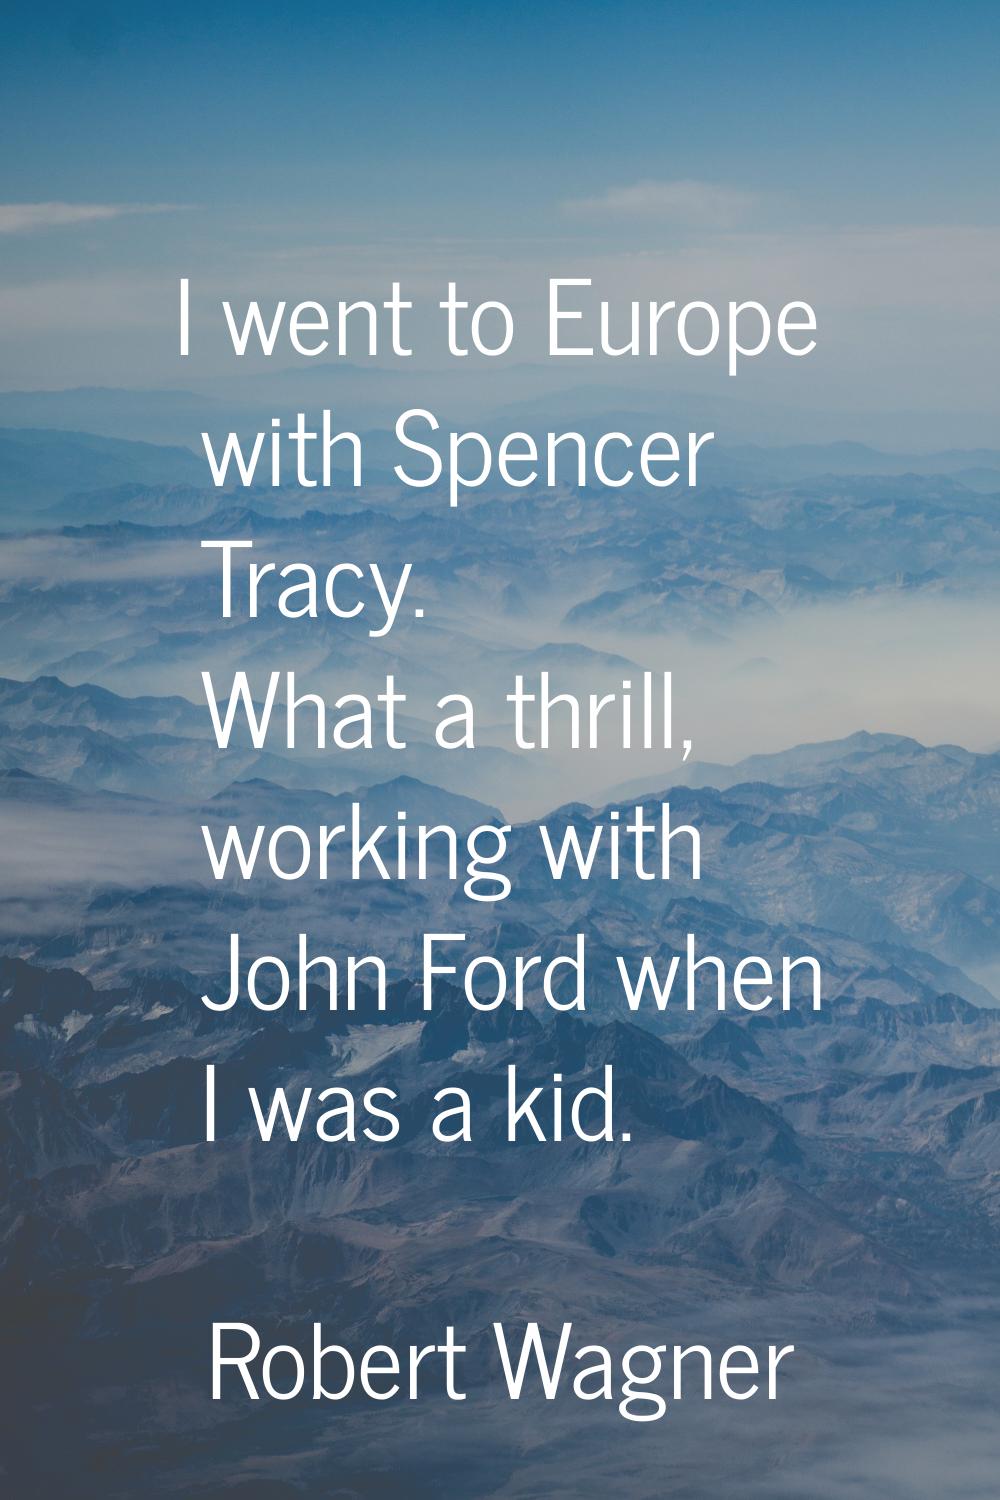 I went to Europe with Spencer Tracy. What a thrill, working with John Ford when I was a kid.